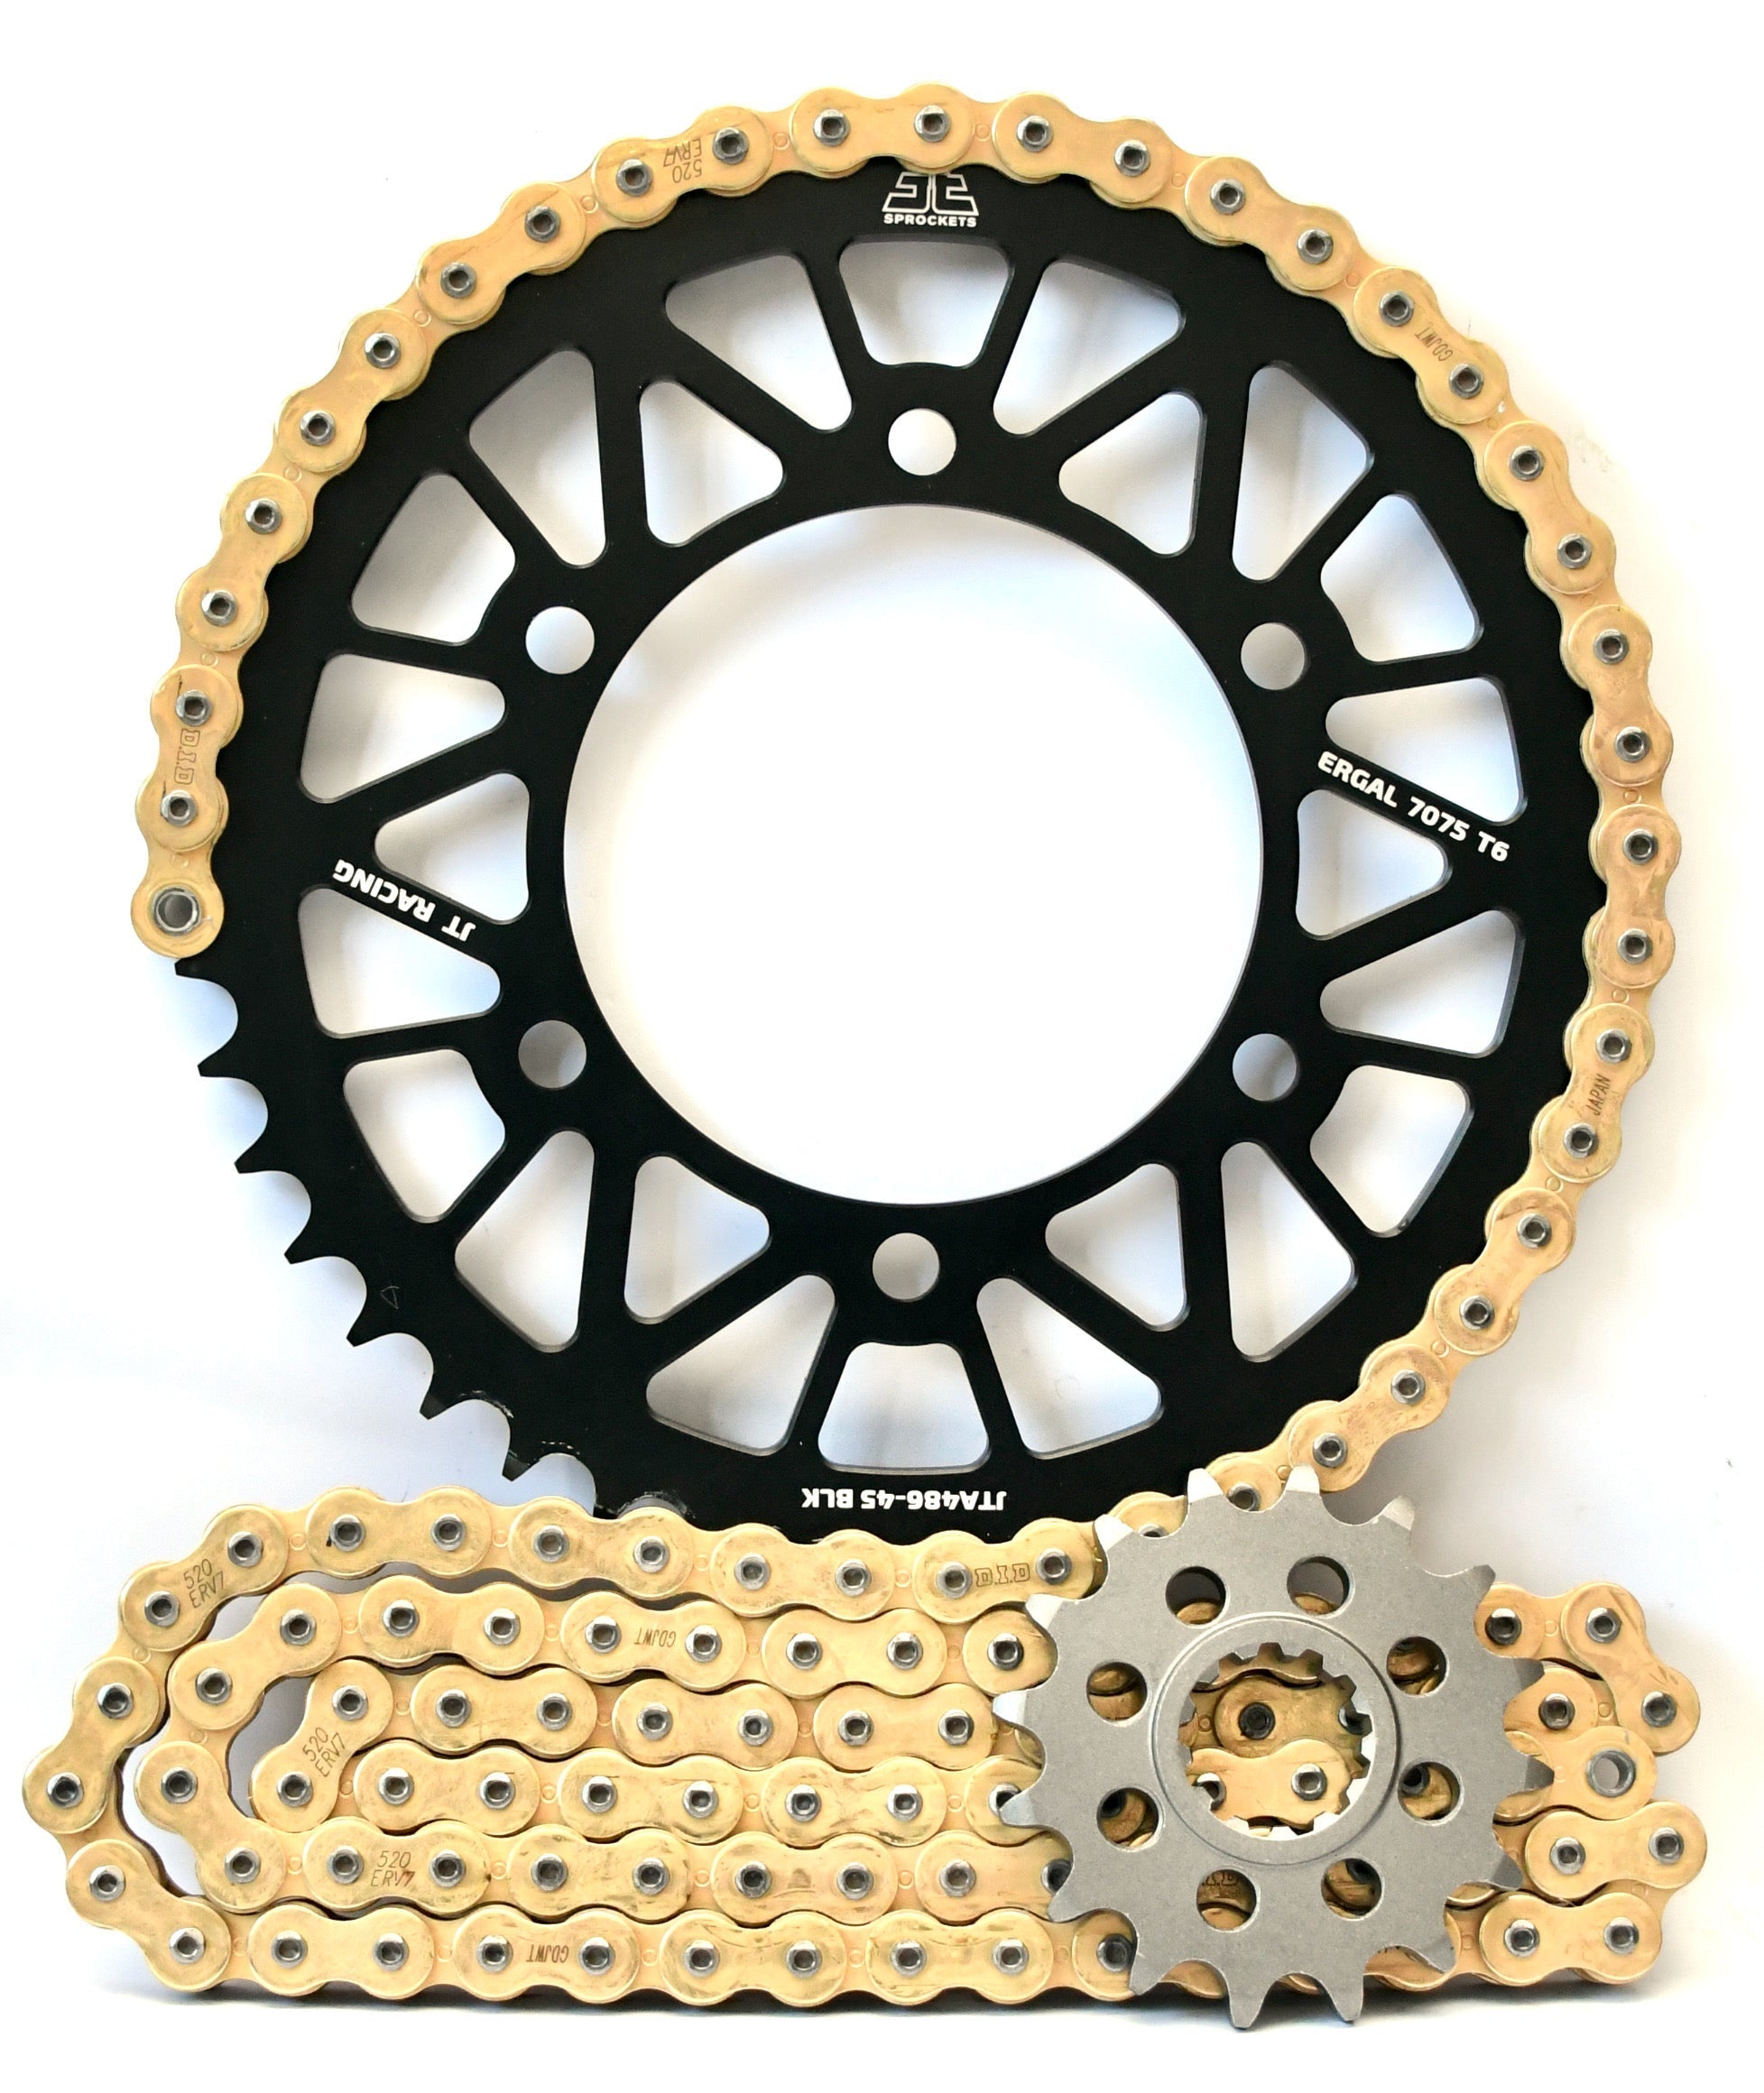 JT Racelite and DID 520 Conversion Chain & Sprocket Kit for BMW S1000RR 2015-2018 - Standard Gearing